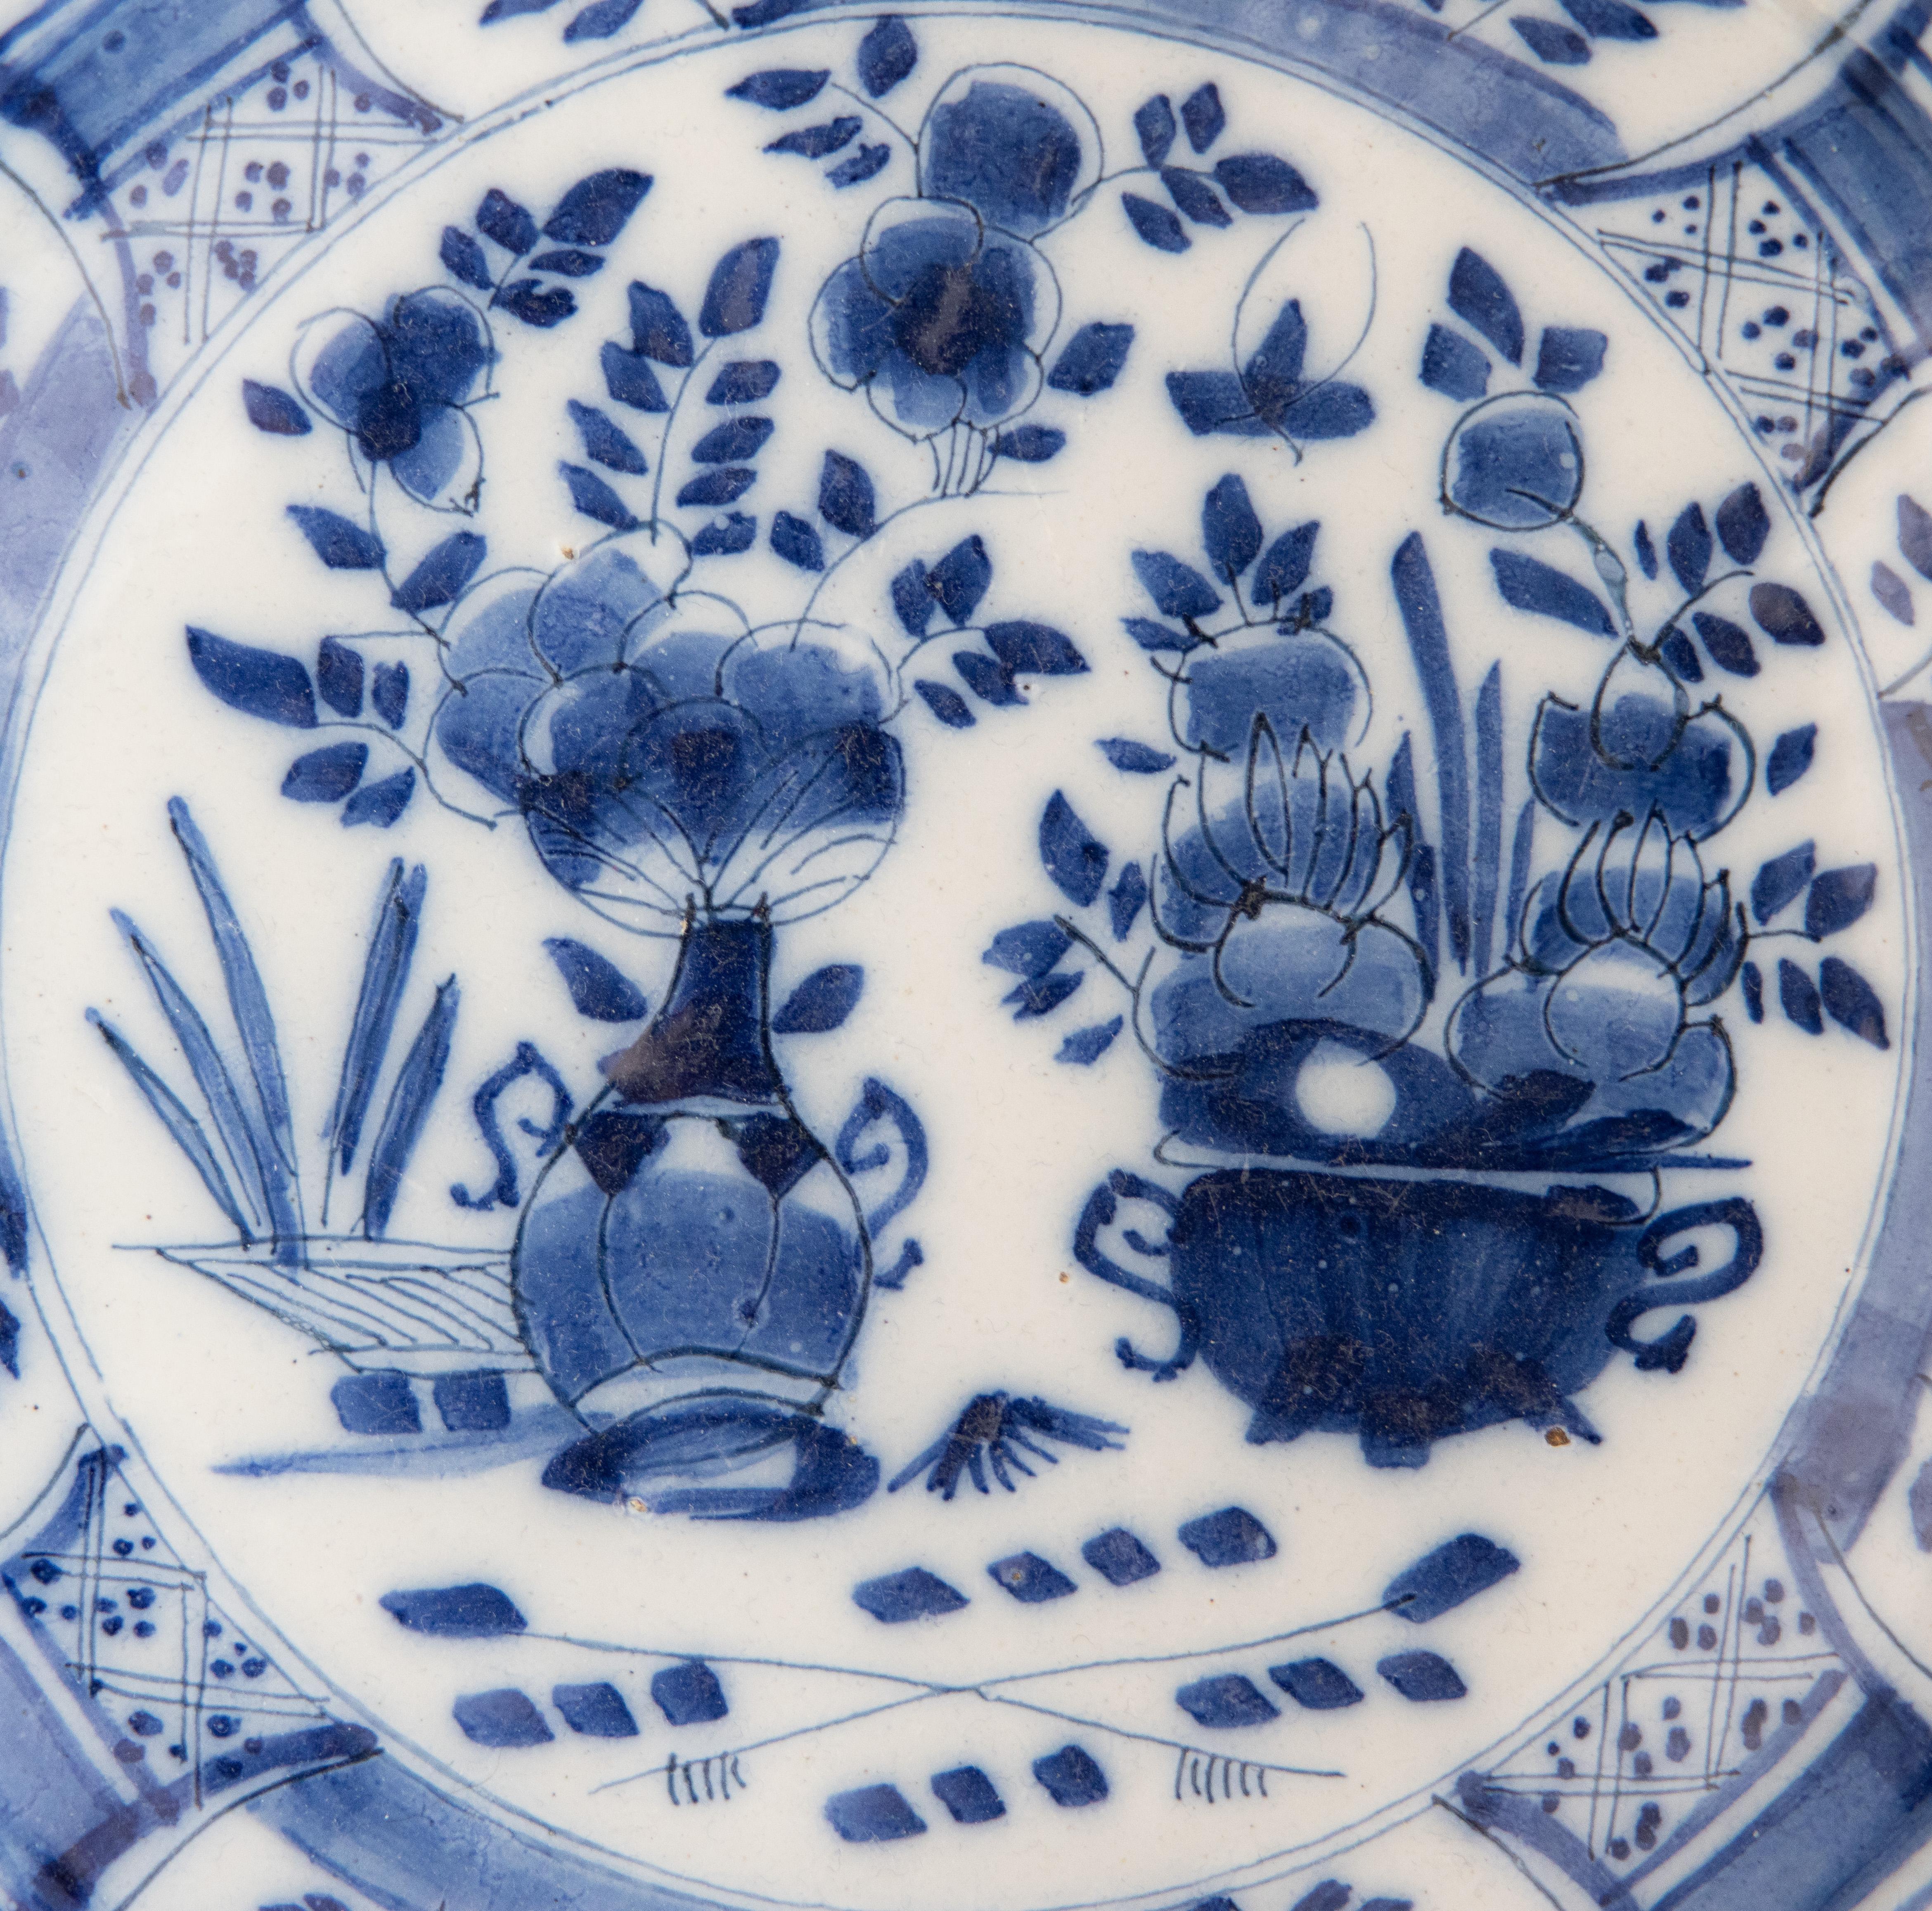 A lovely antique 18th-Century Dutch Delft Chinoiserie hand painted floral plate in vibrant cobalt blue and white. It would look fabulous displayed on a wall or shelf in any room. A classic and timeless piece that will never go out of